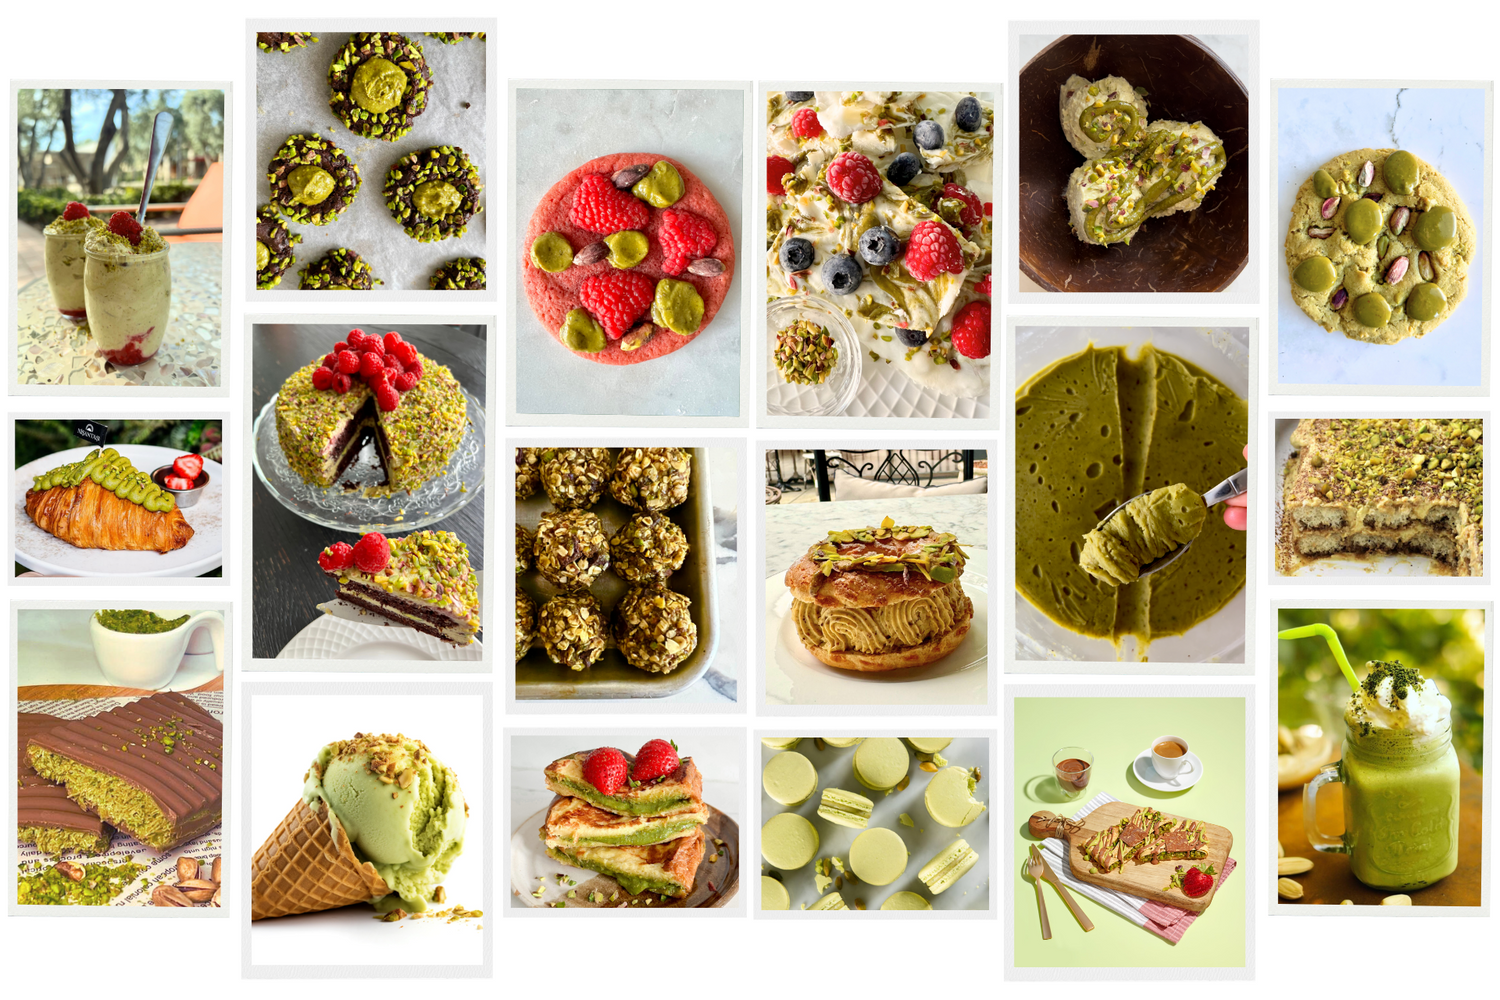 ways to use pistachio butter, ways to use pistachio cream, pistachio ice cream, pistachio cookies, pistachio brownies, pistachio croissant, pistachio milkshake, pistachio cake, pistachio chocolate, dubai chocolate, knafeh chocolate, kataifi chocolate